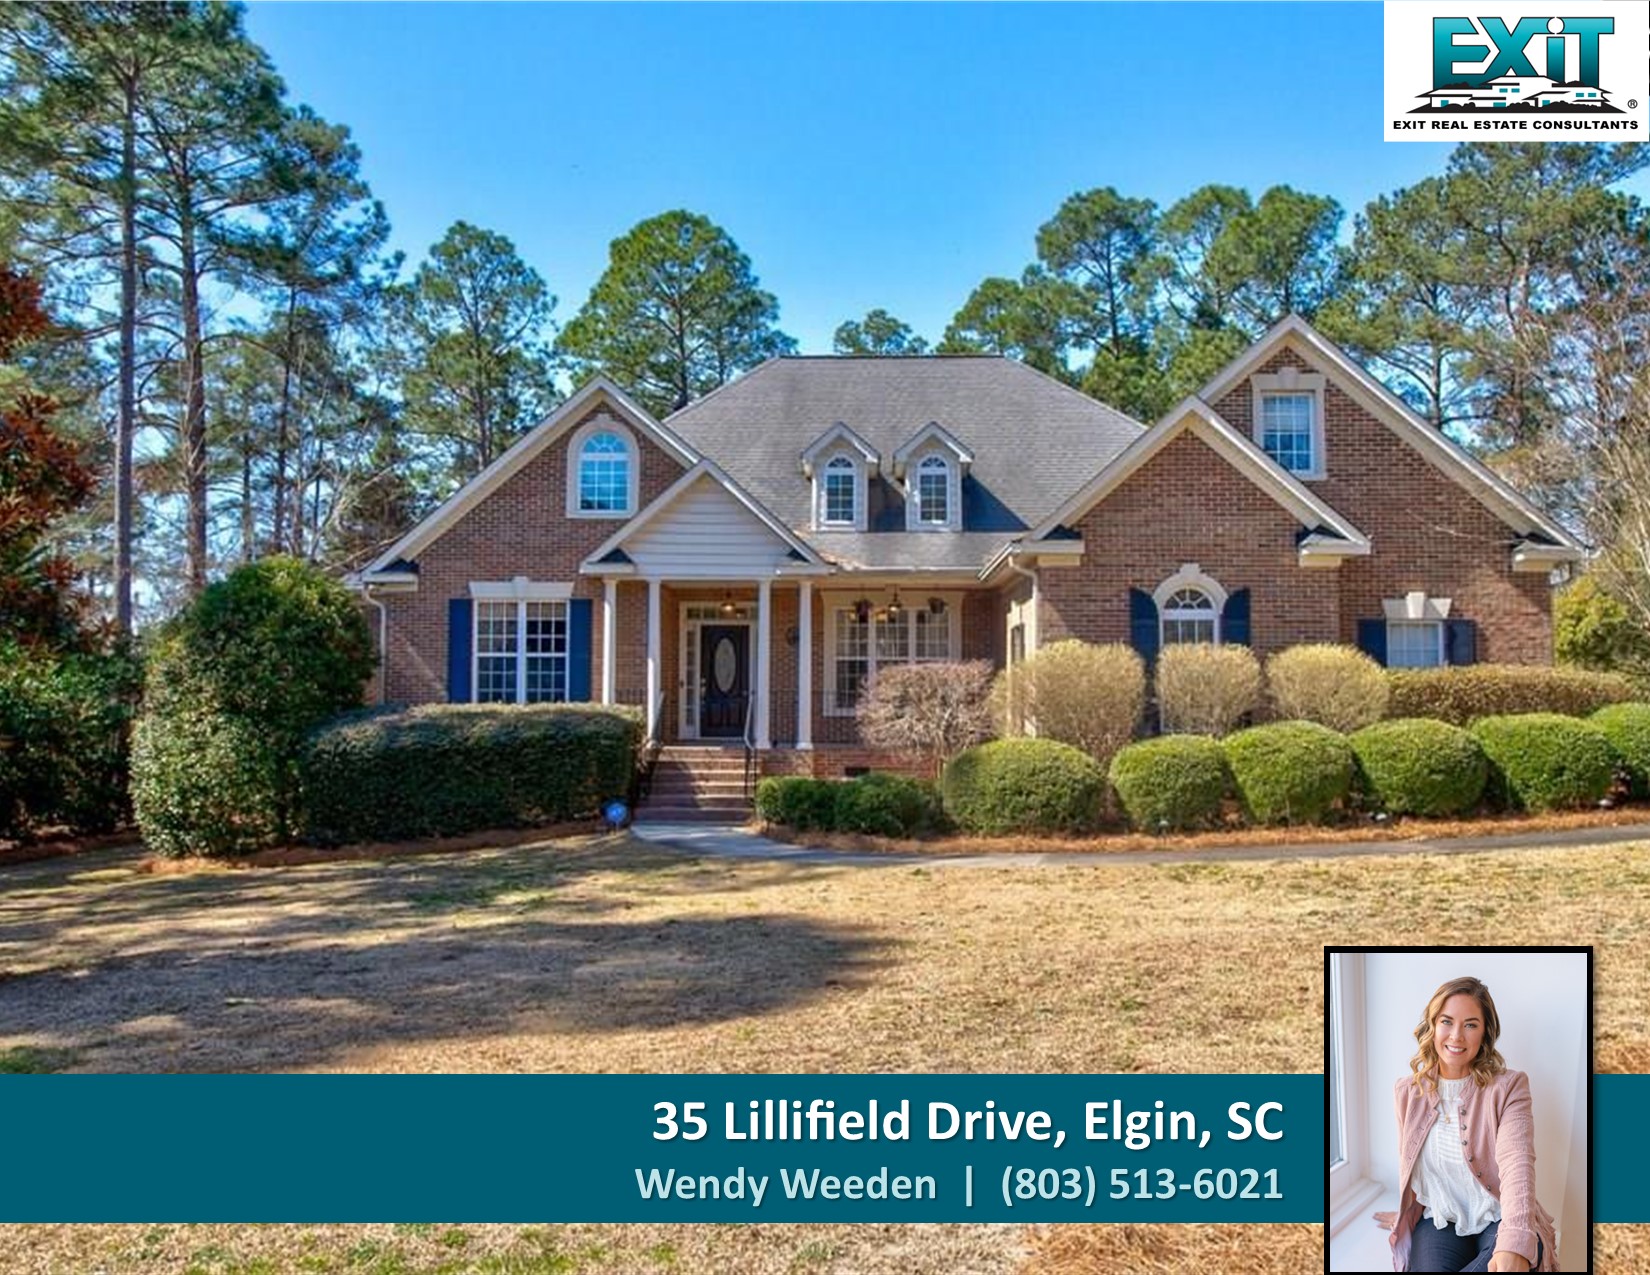 Just listed in Haigs Creek